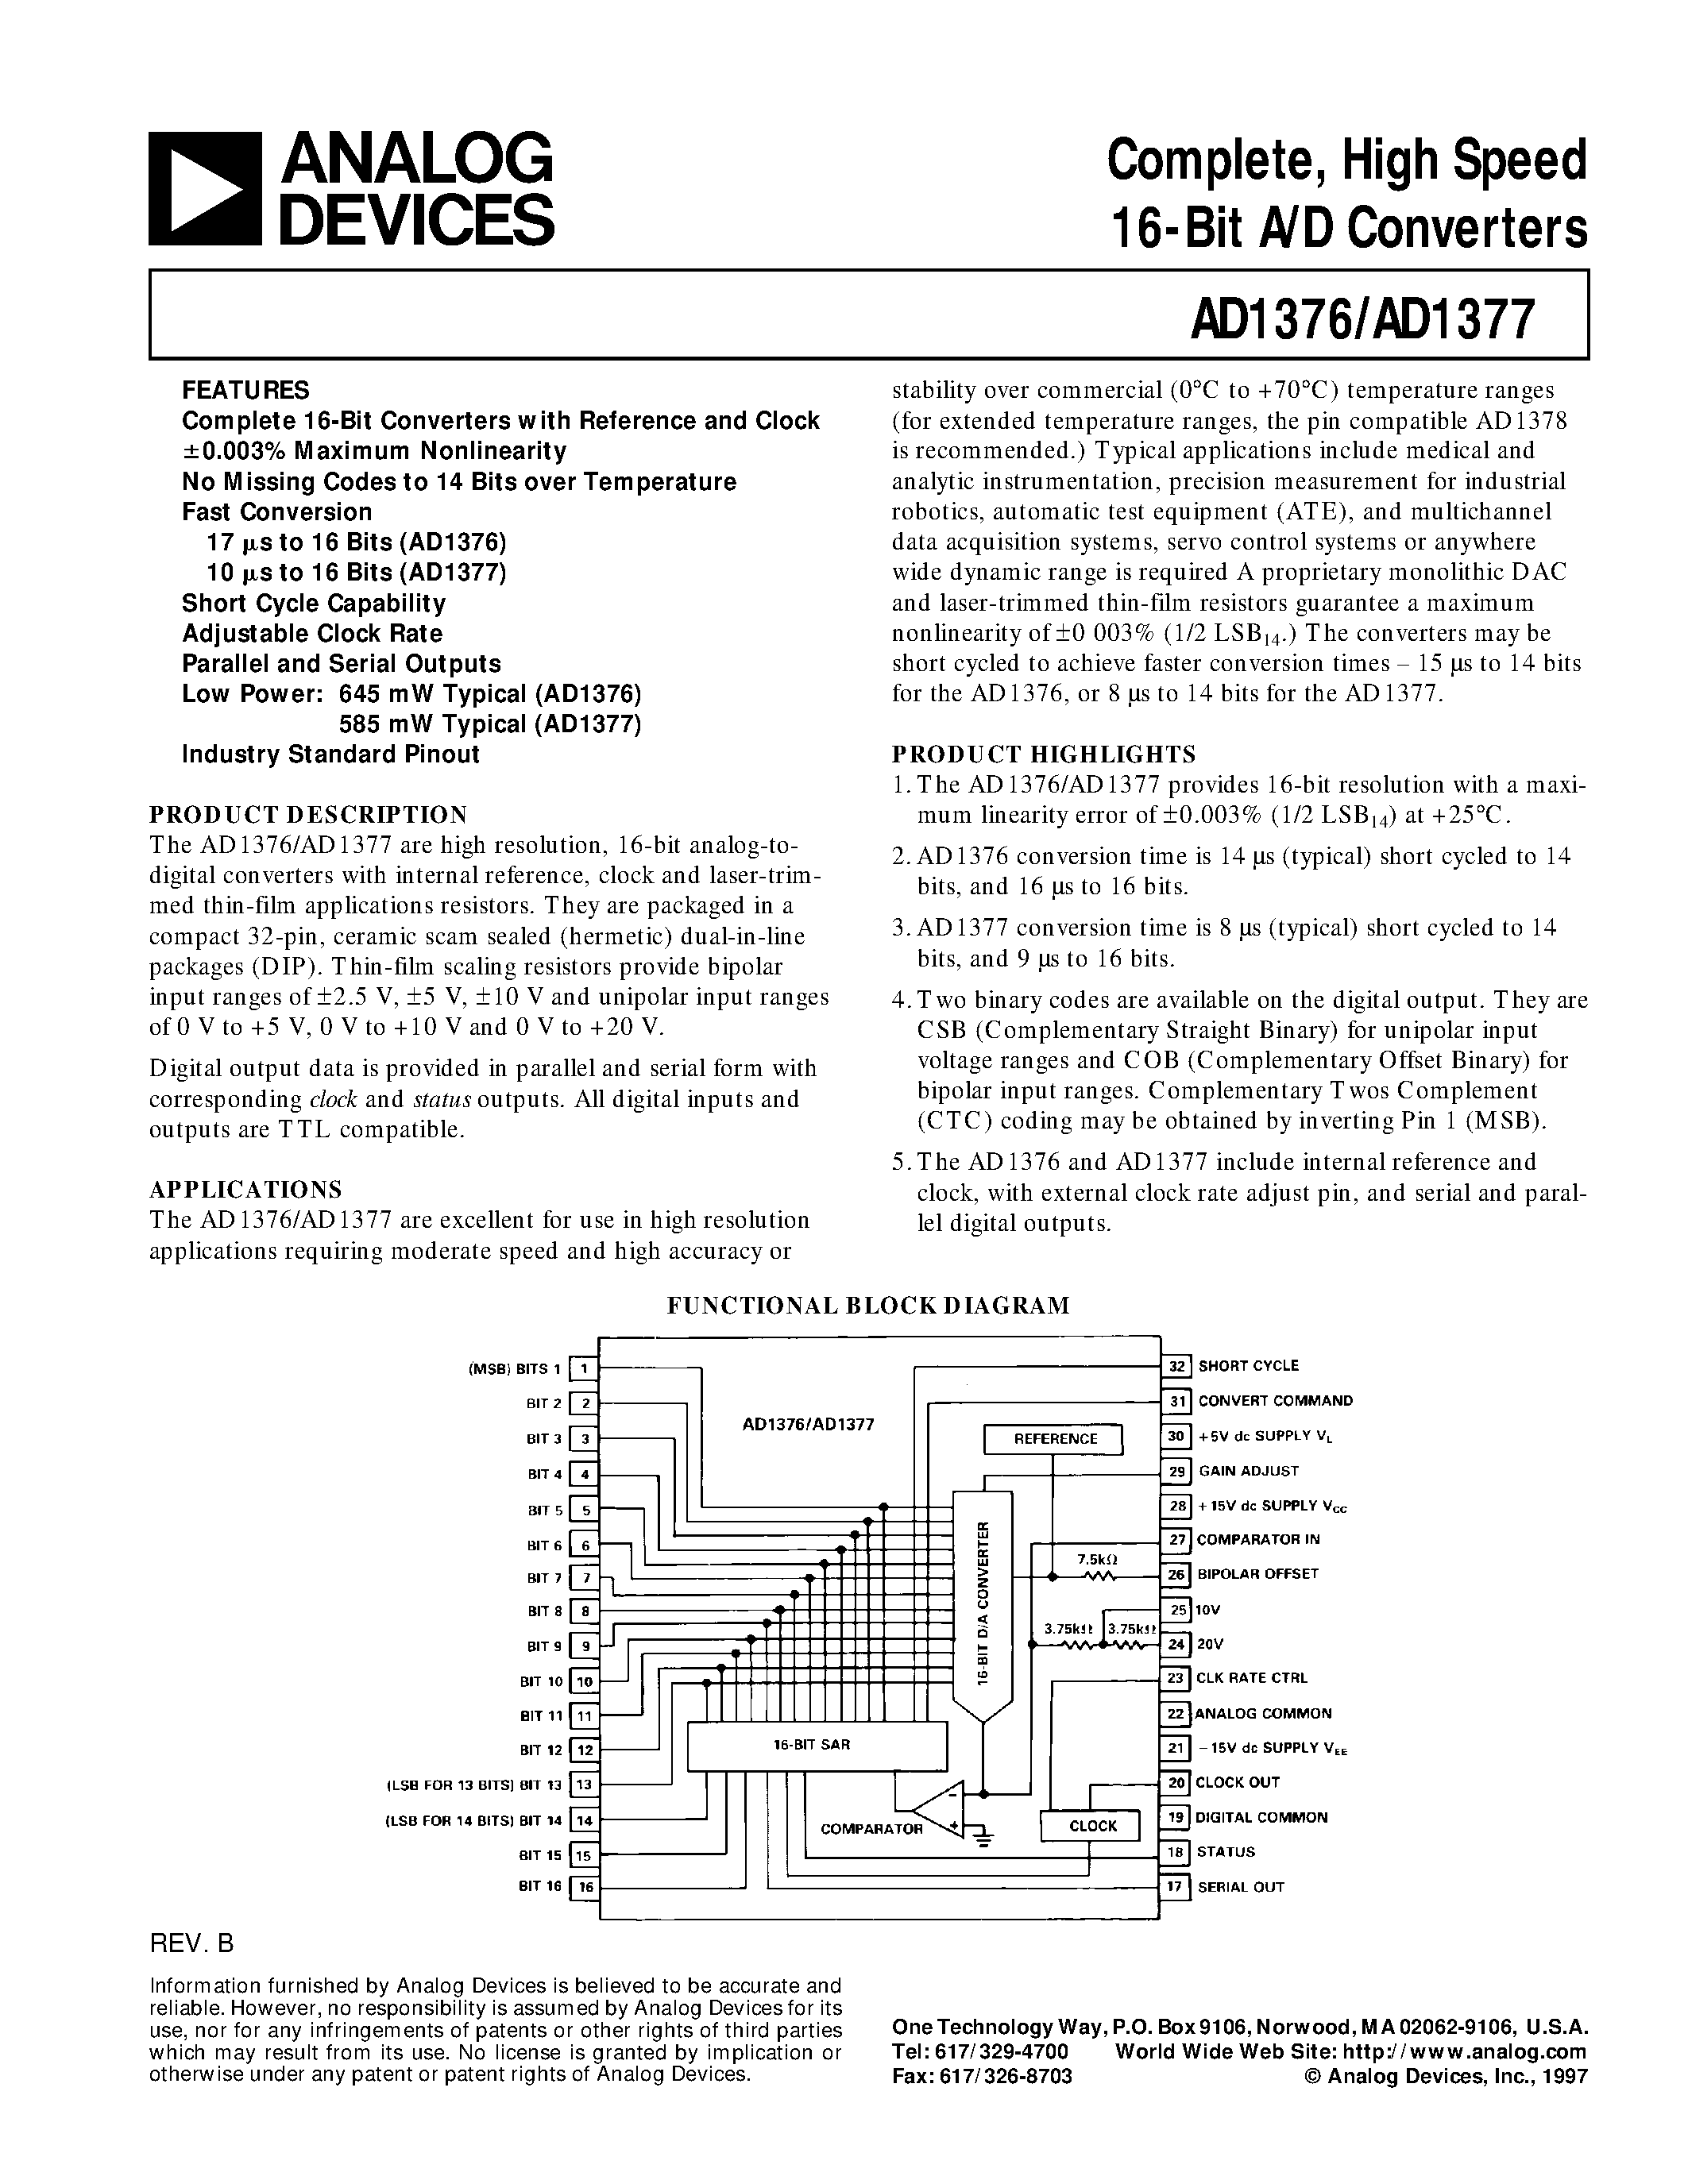 Datasheet AD1377KD - Complete/ High Speed 16-Bit A/D Converters page 1